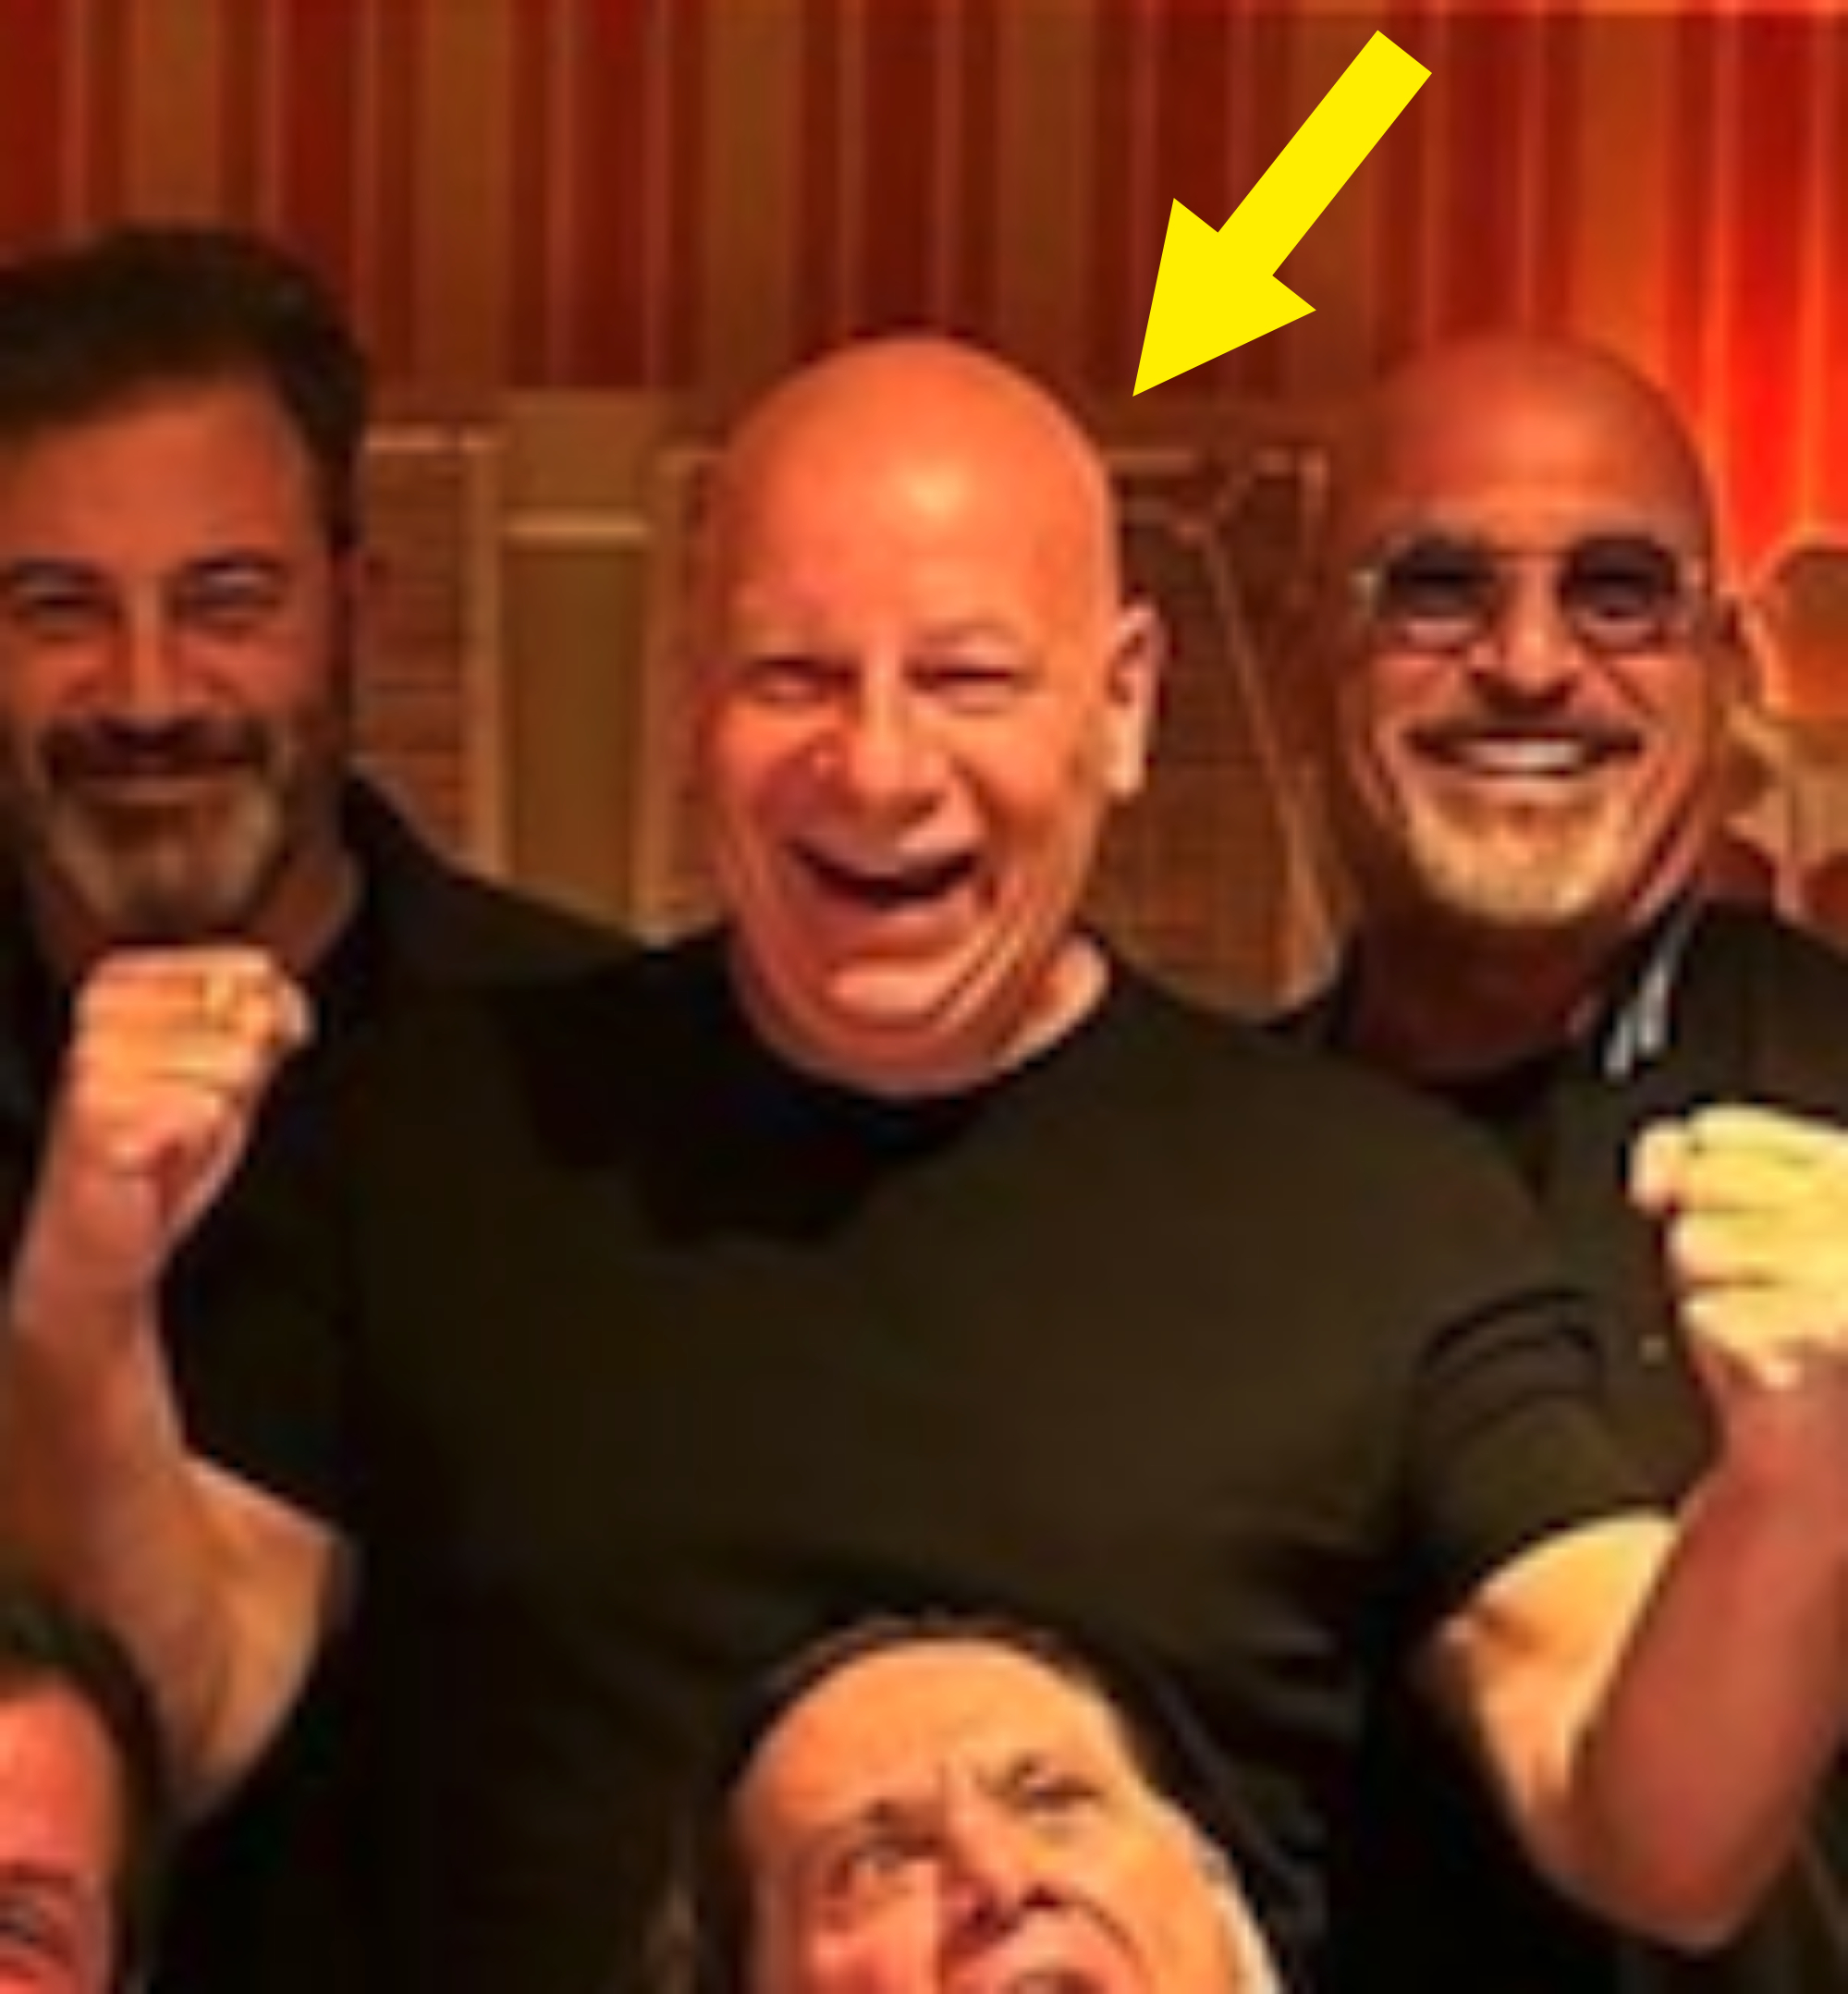 Arrow pointing to Jeff (next to Jimmy and Howie Mandel) laughing